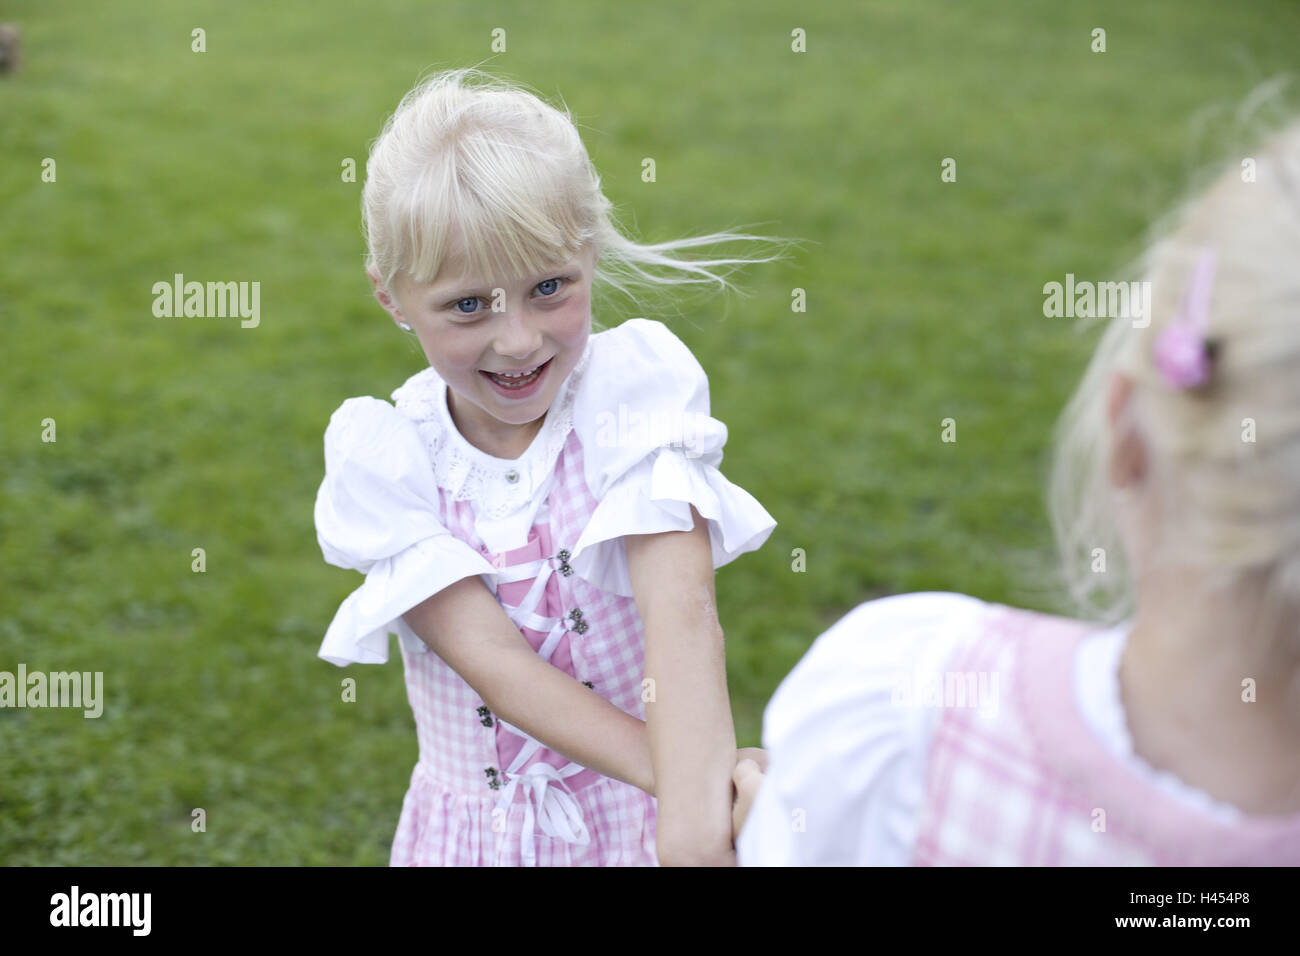 Meadow, girl, two, dirndls, play, wooden hut, hut, alpine hut, alp, person, children, sisters, siblings, blond, friends, national costume, clothes, checked, pink, joy, fun, happy, melted, dance, circle, rotate, smile, there stand, naturalness, childhood, summers, holidays, Stock Photo